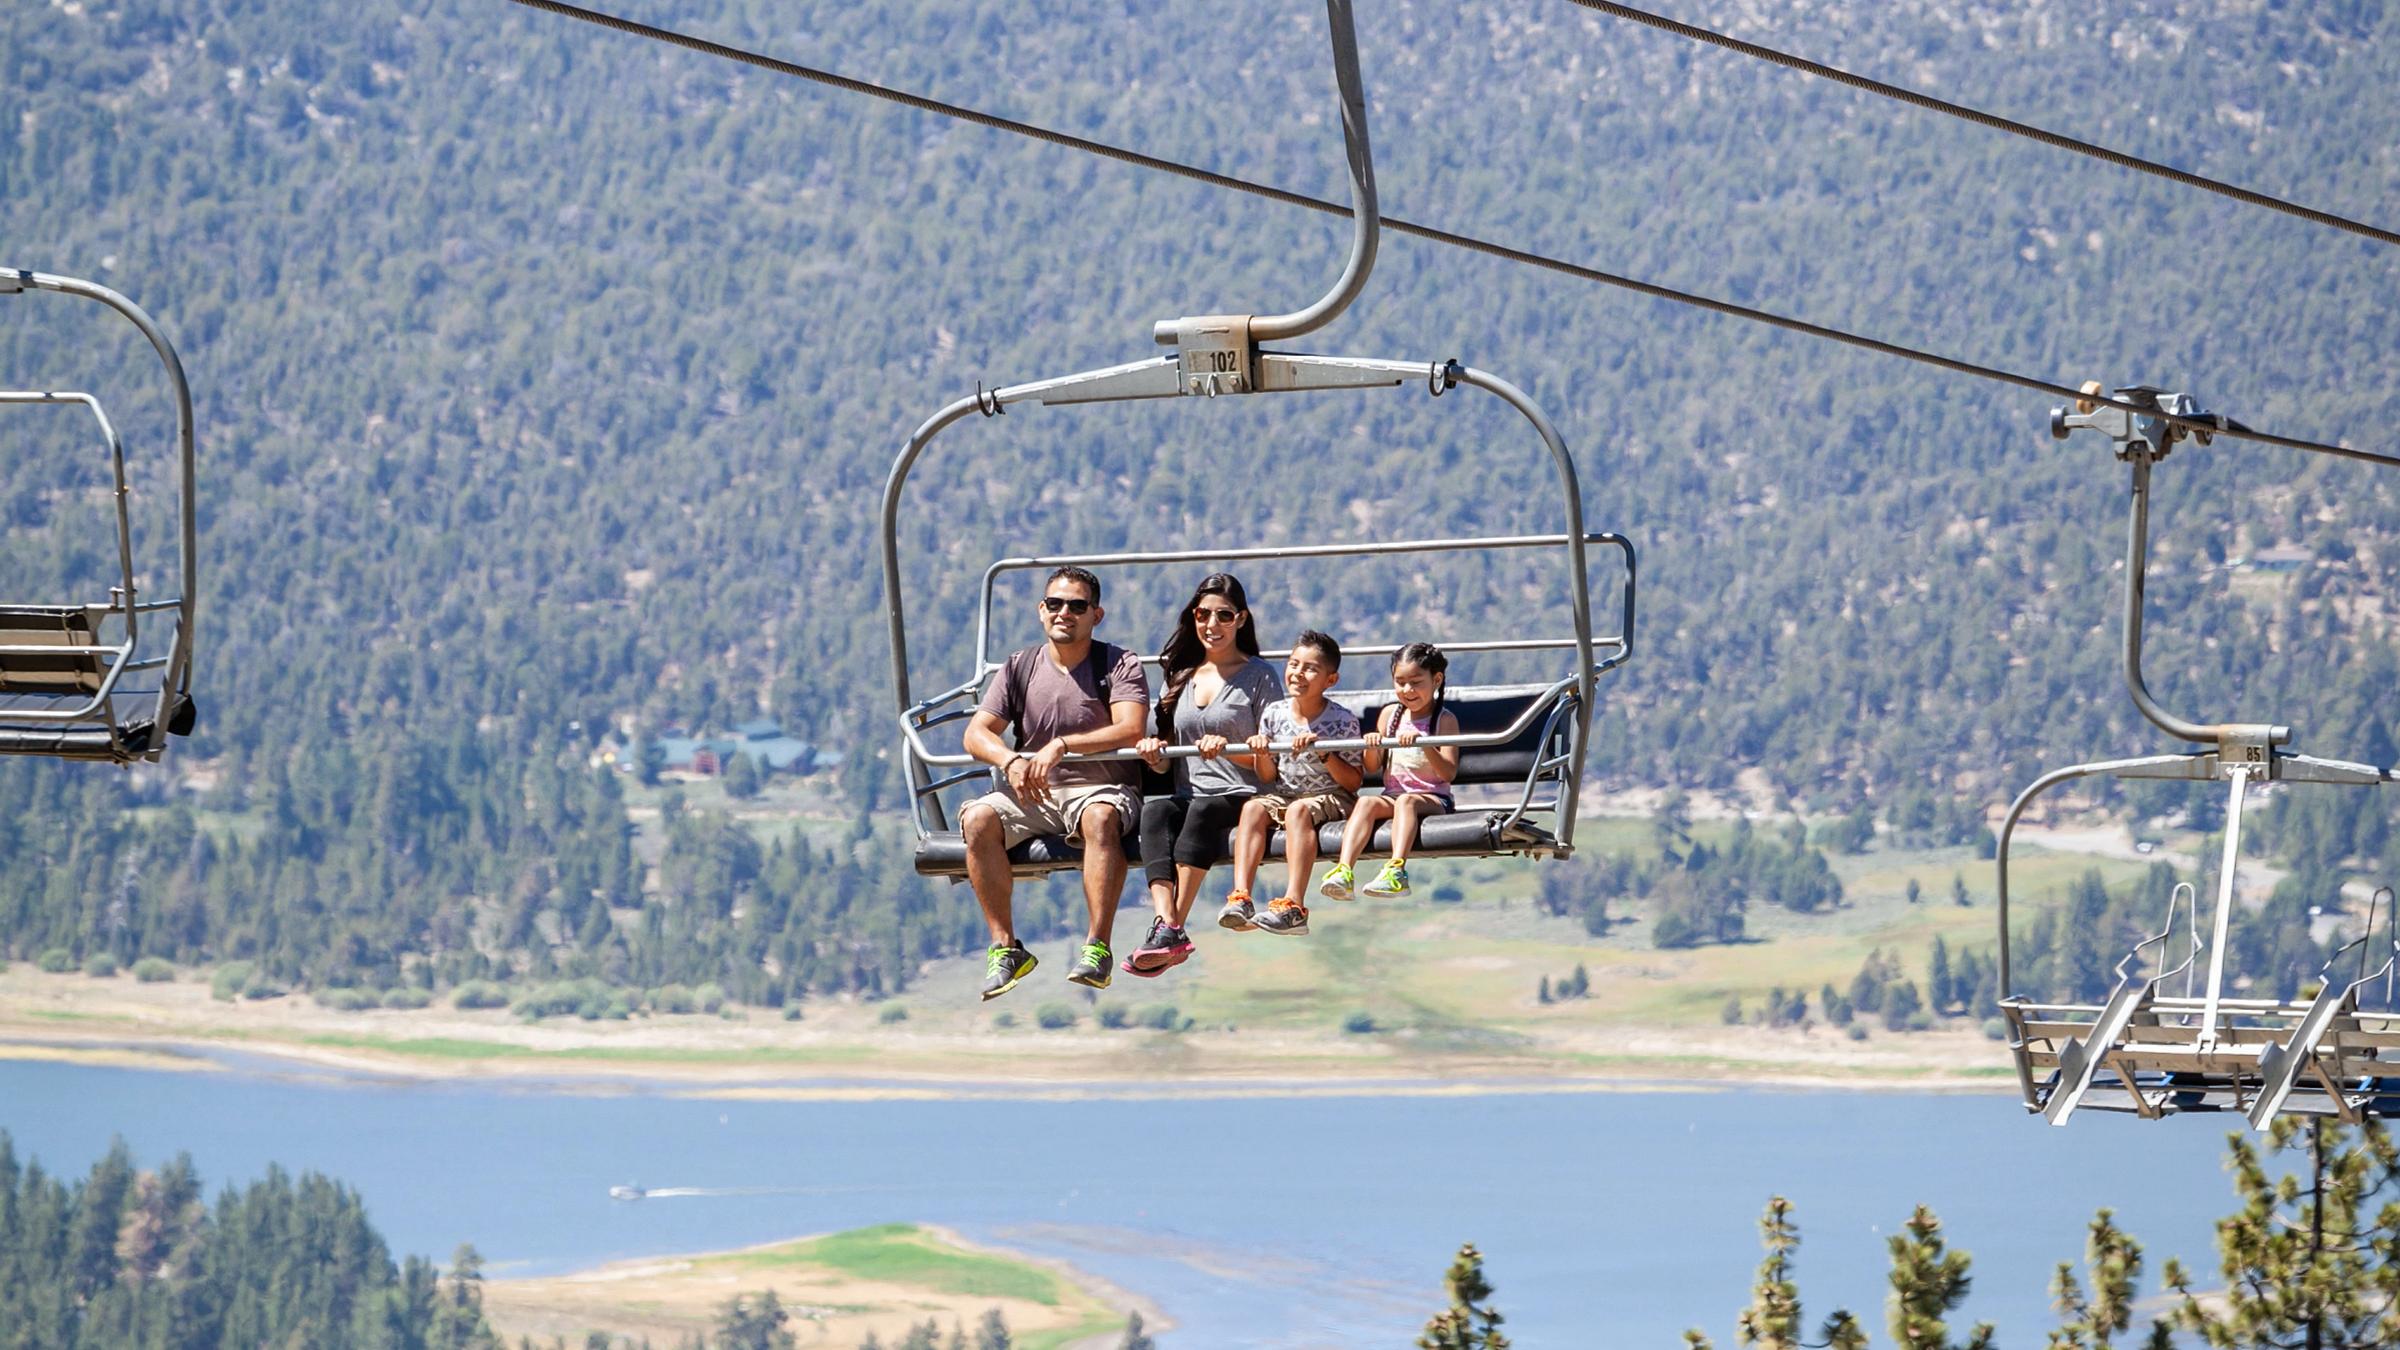 Family on the scenic sky chair